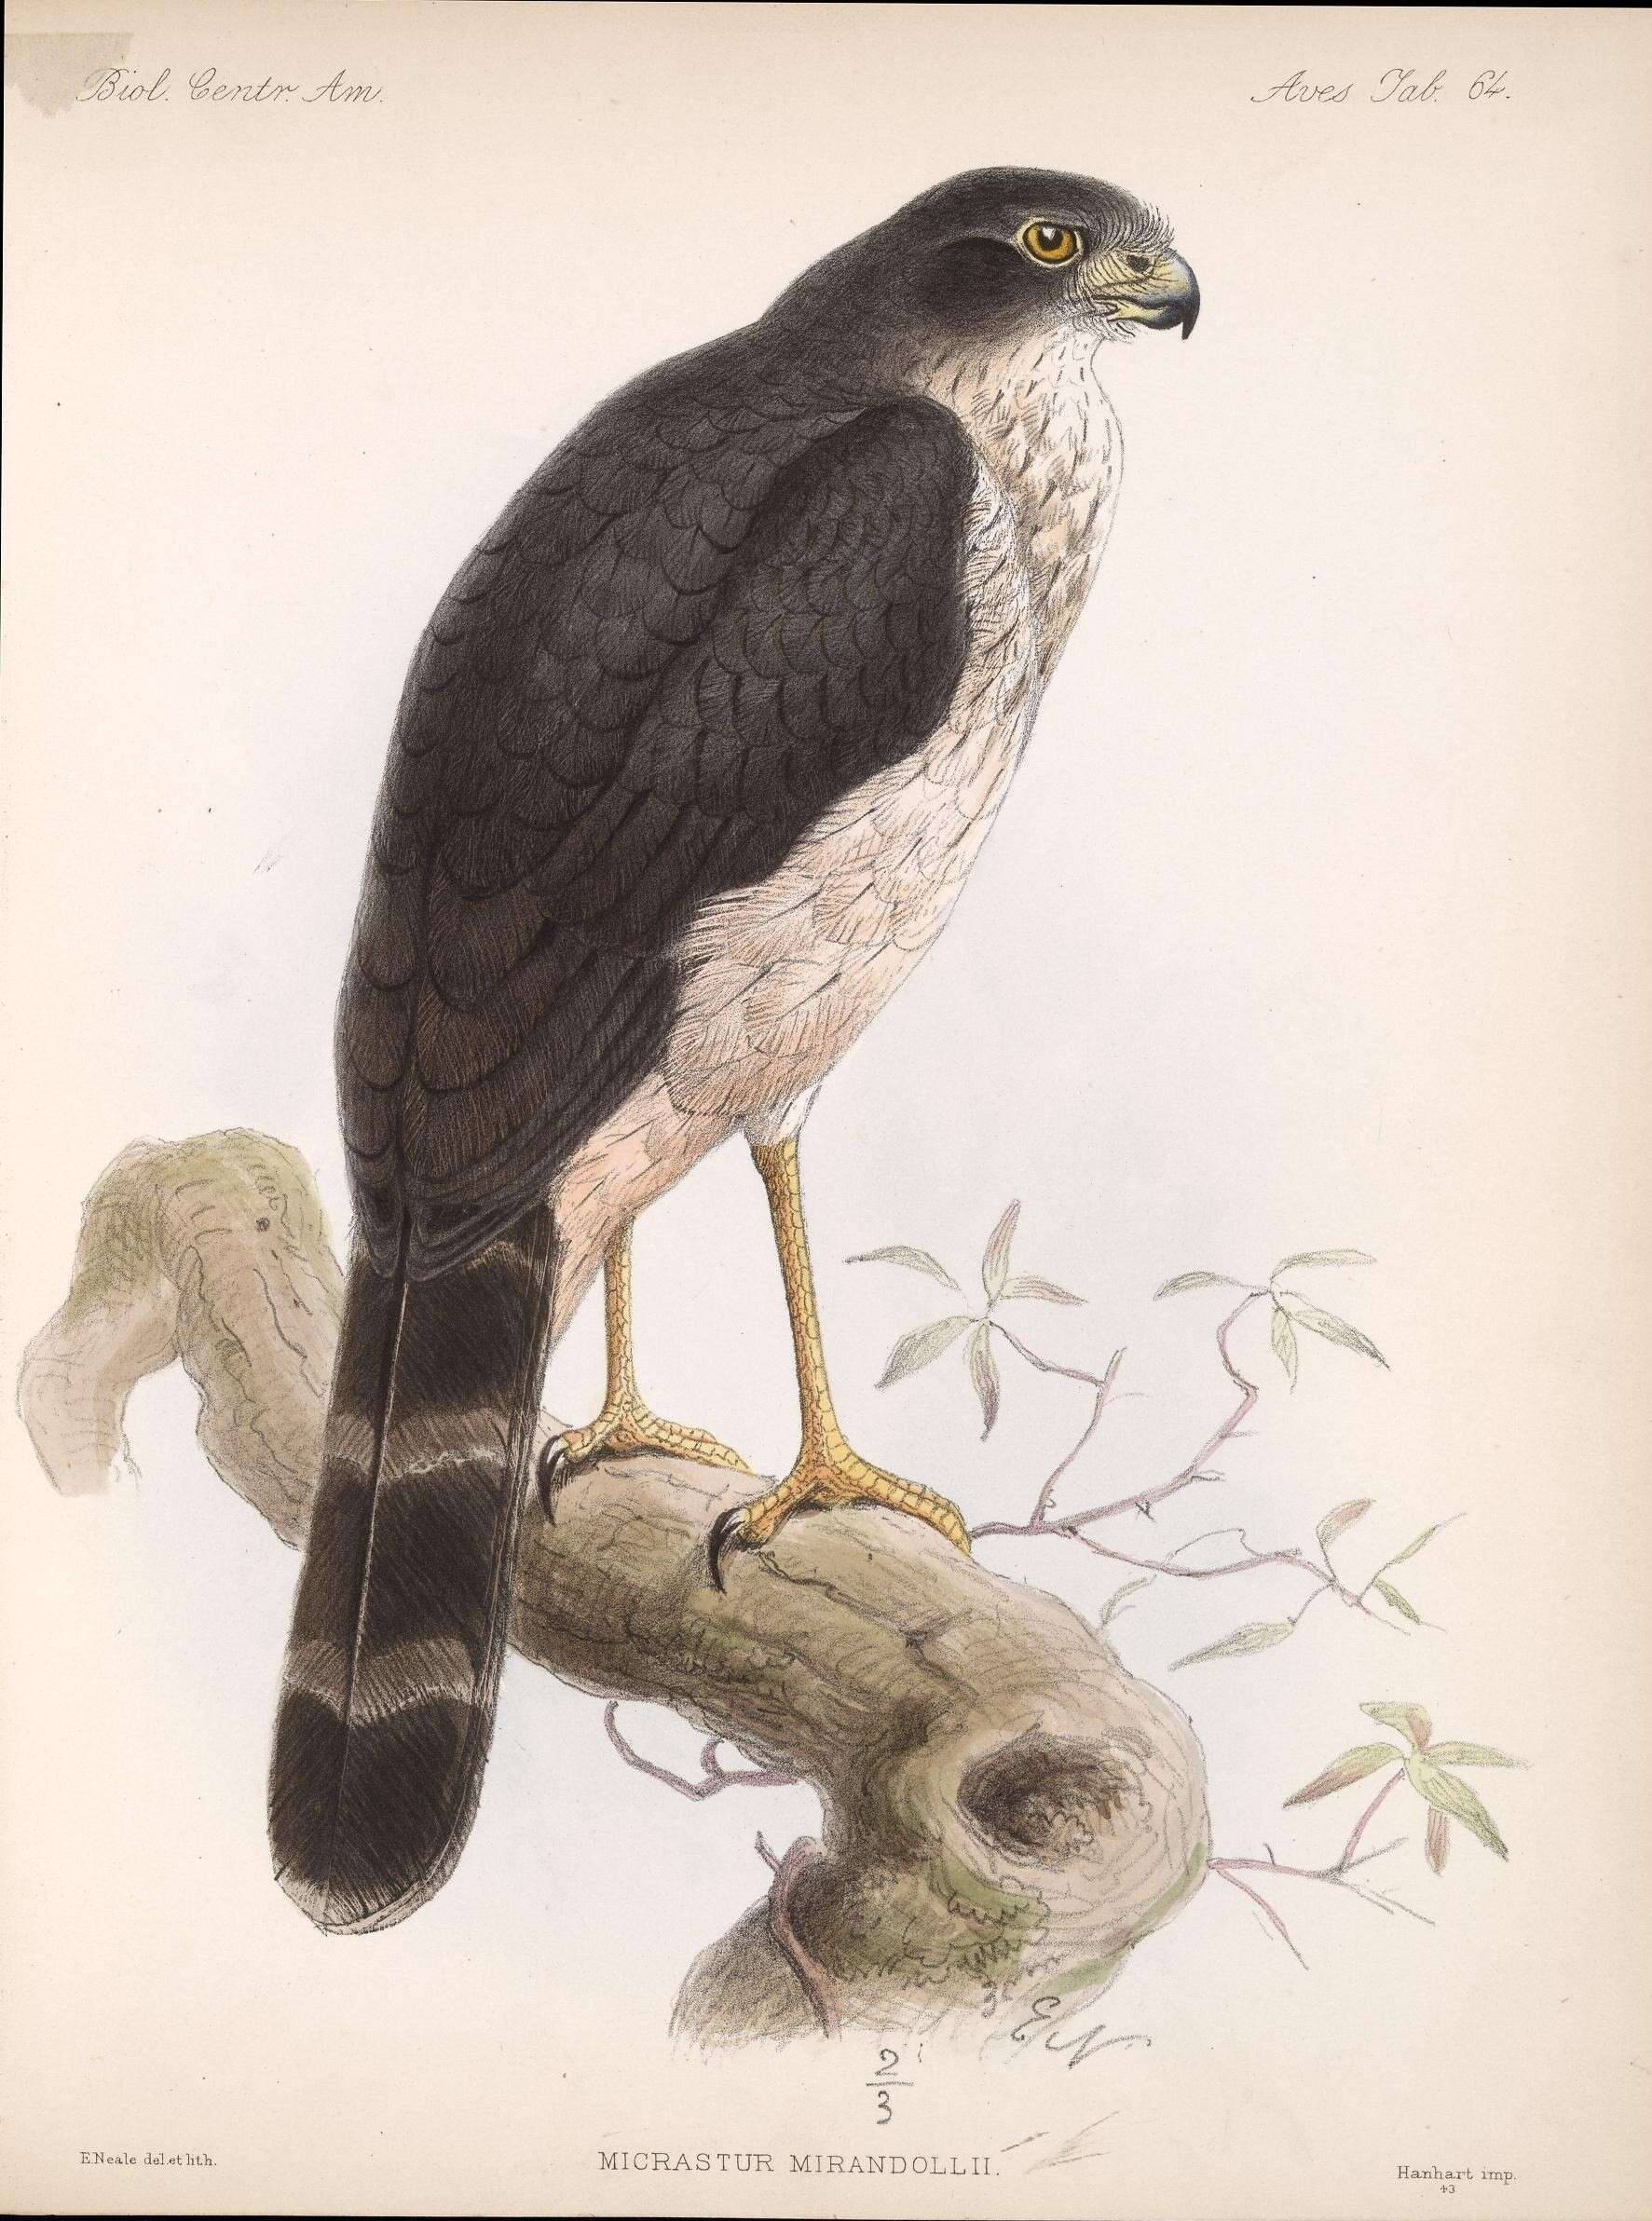 A list of the diurnal birds of prey - Biodiversity Heritage Library